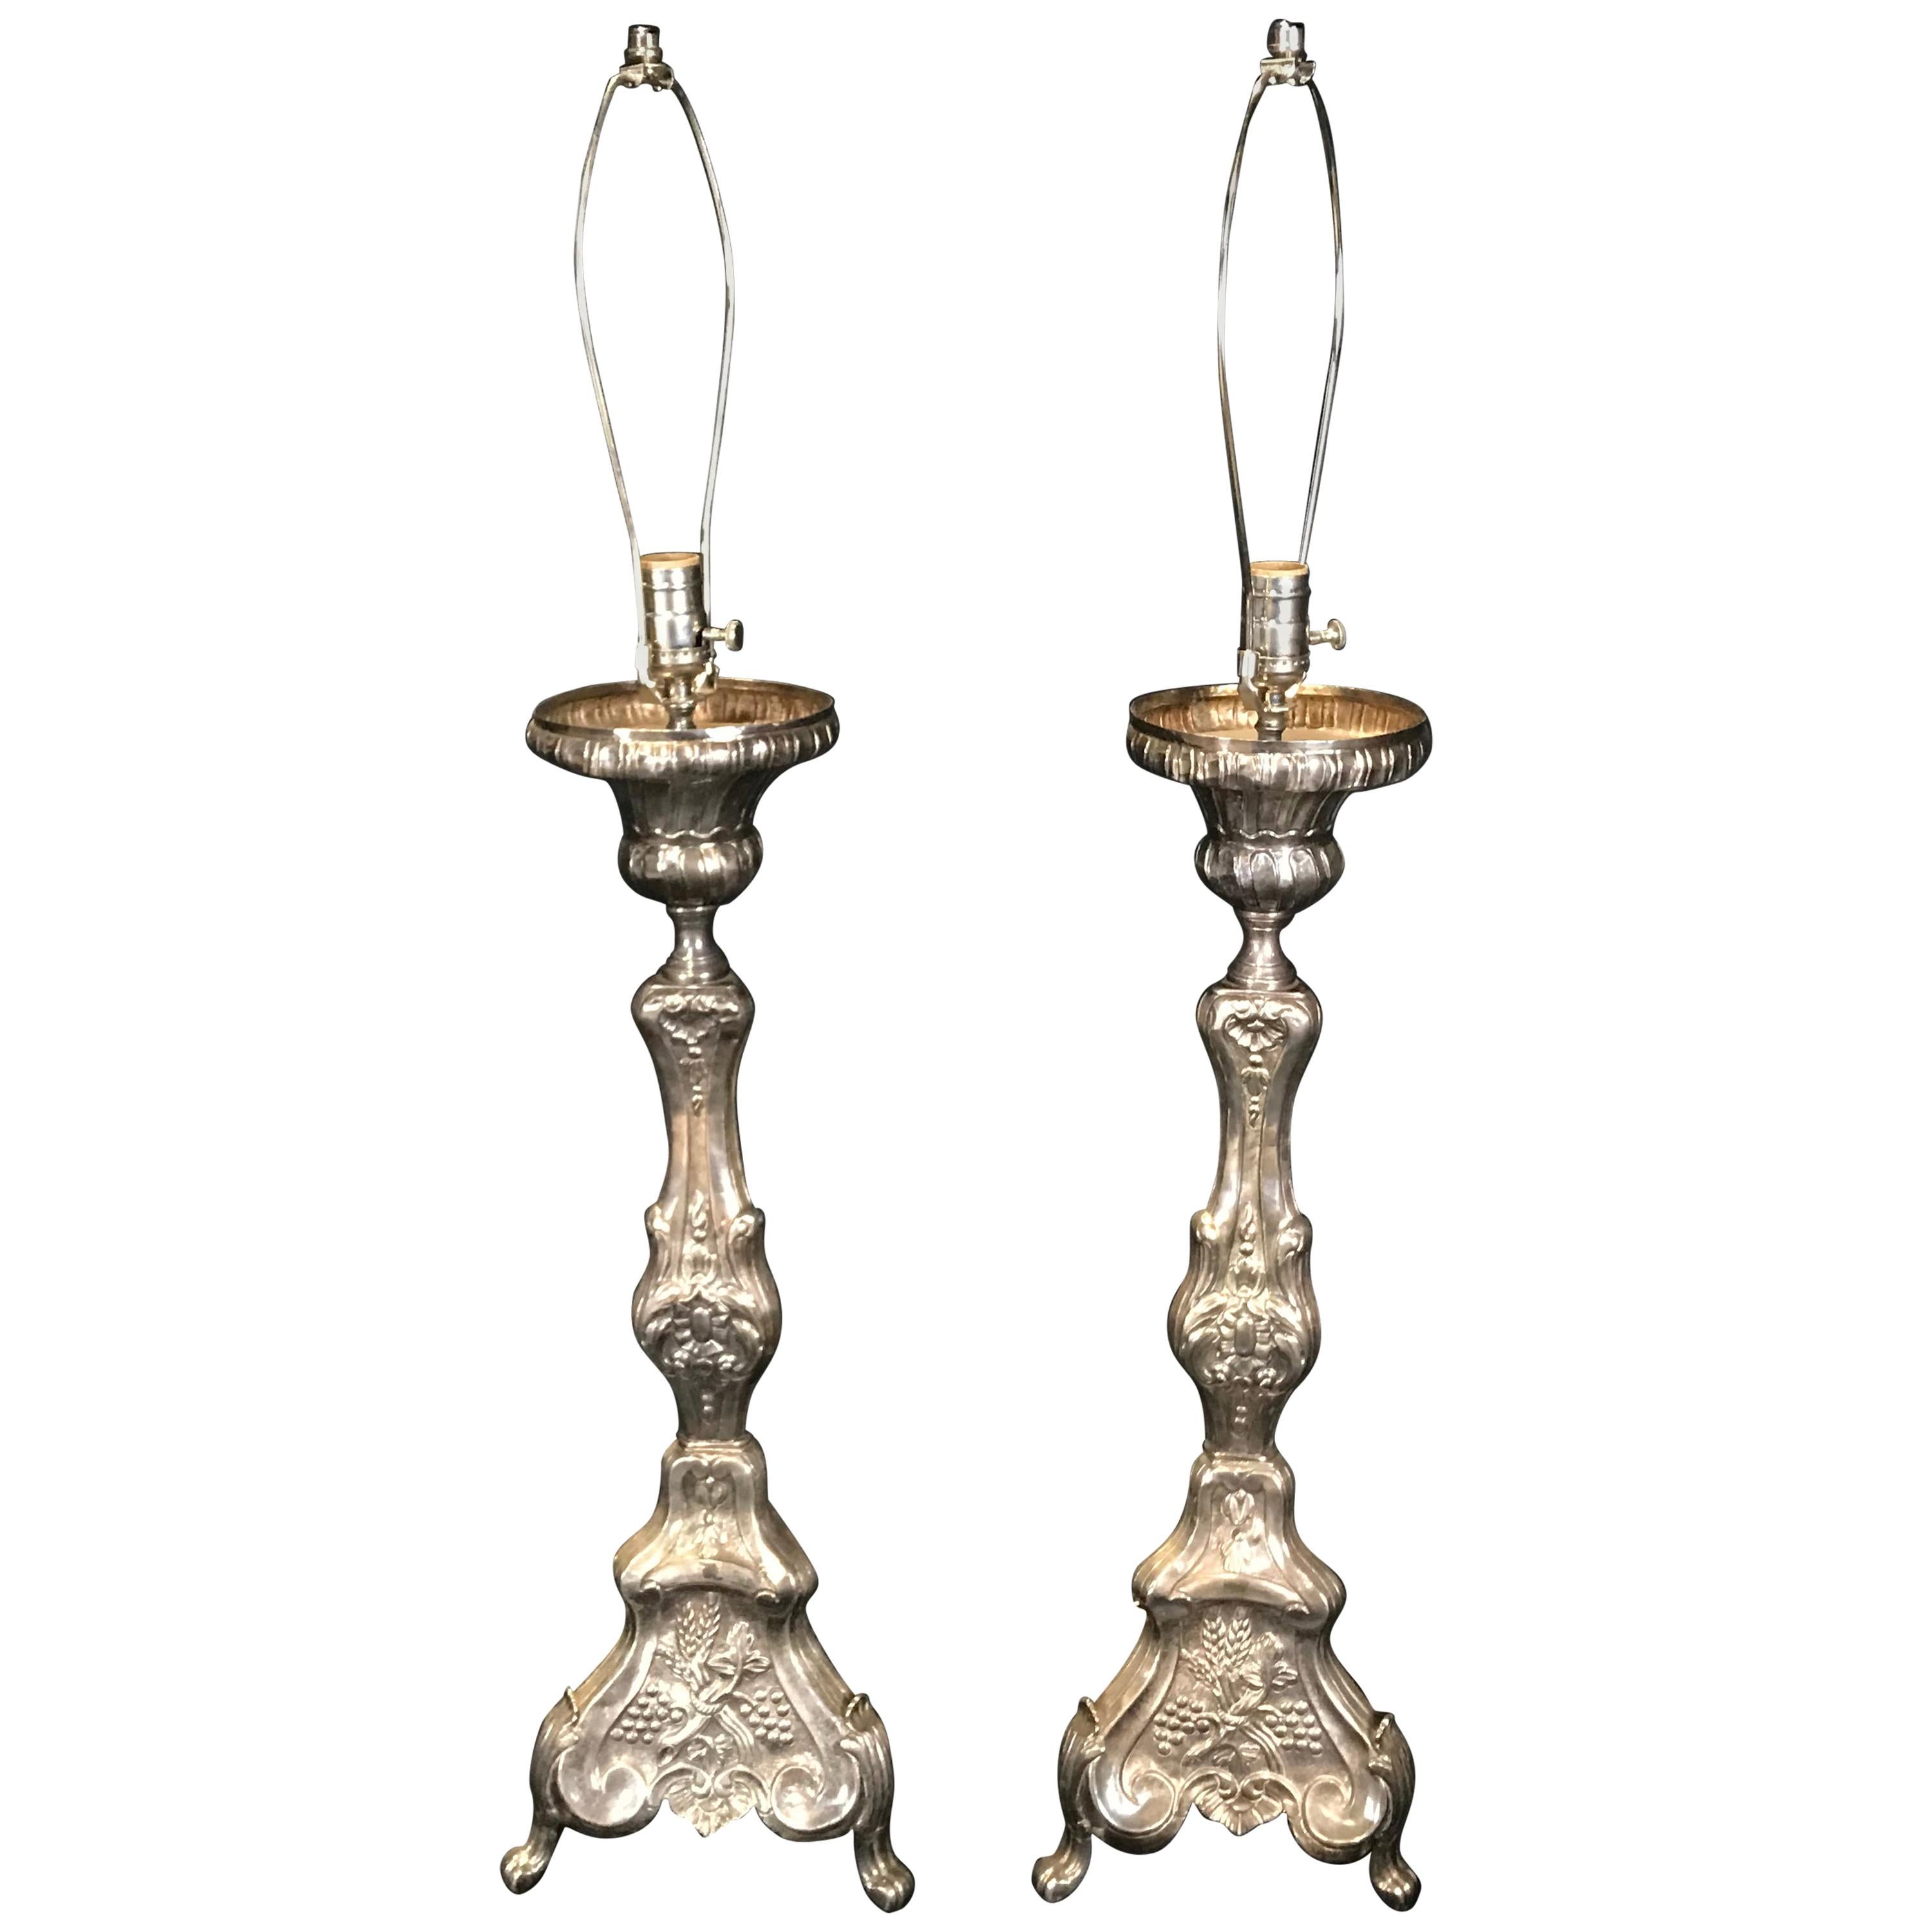 Superb Pair of 19th Century French Silvered Bronze Altar Stick Lamps